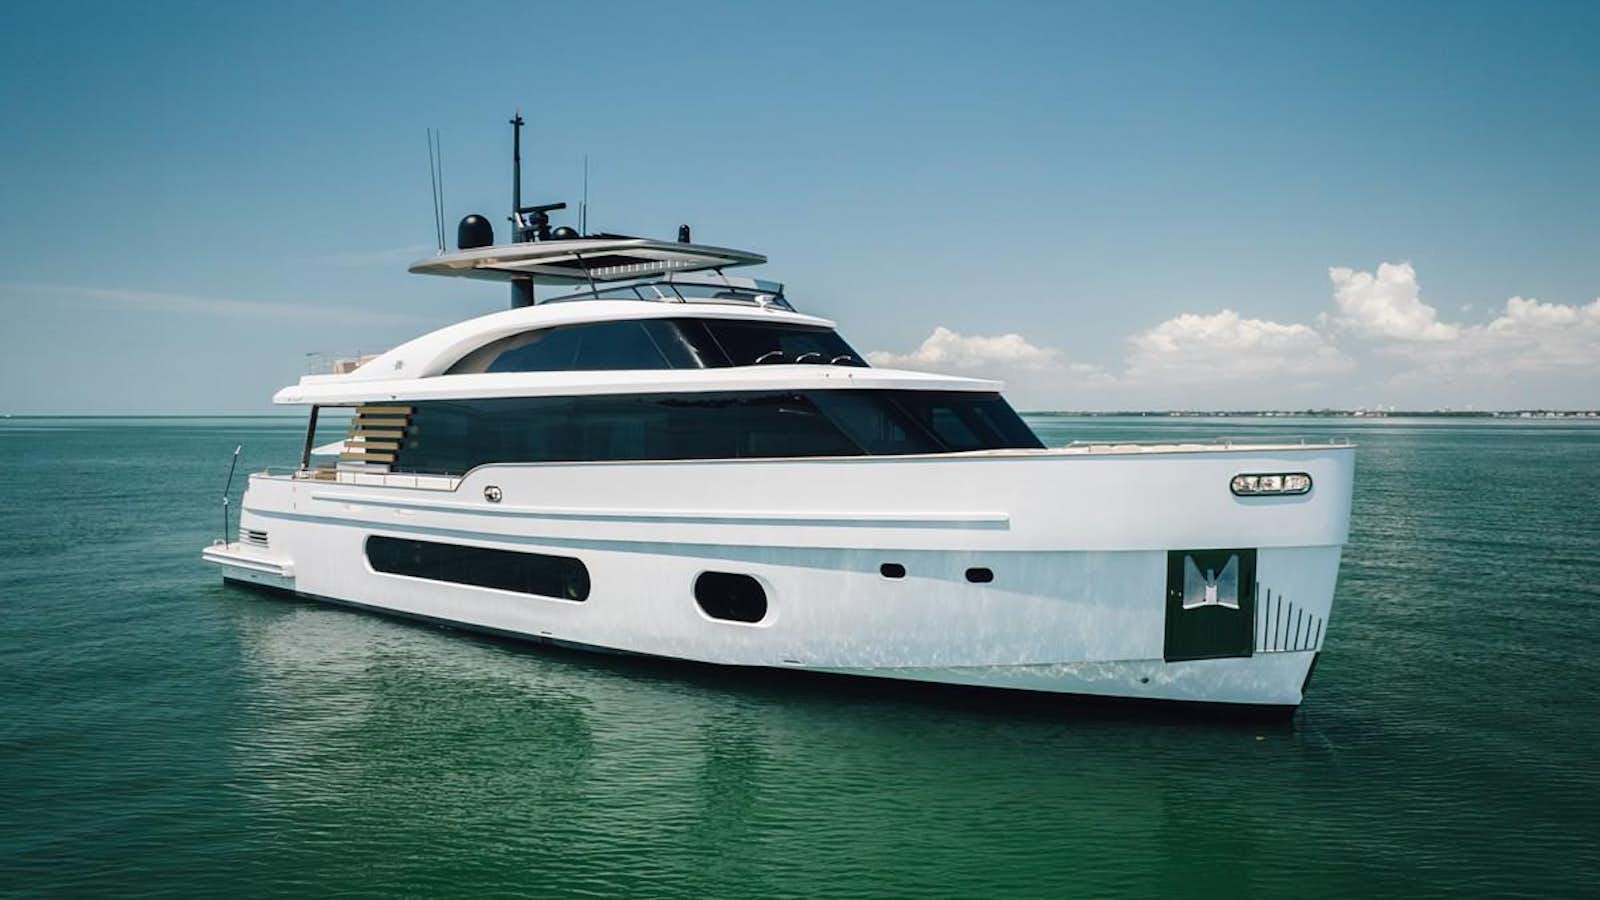 Watch Video for EQUITES Yacht for Sale